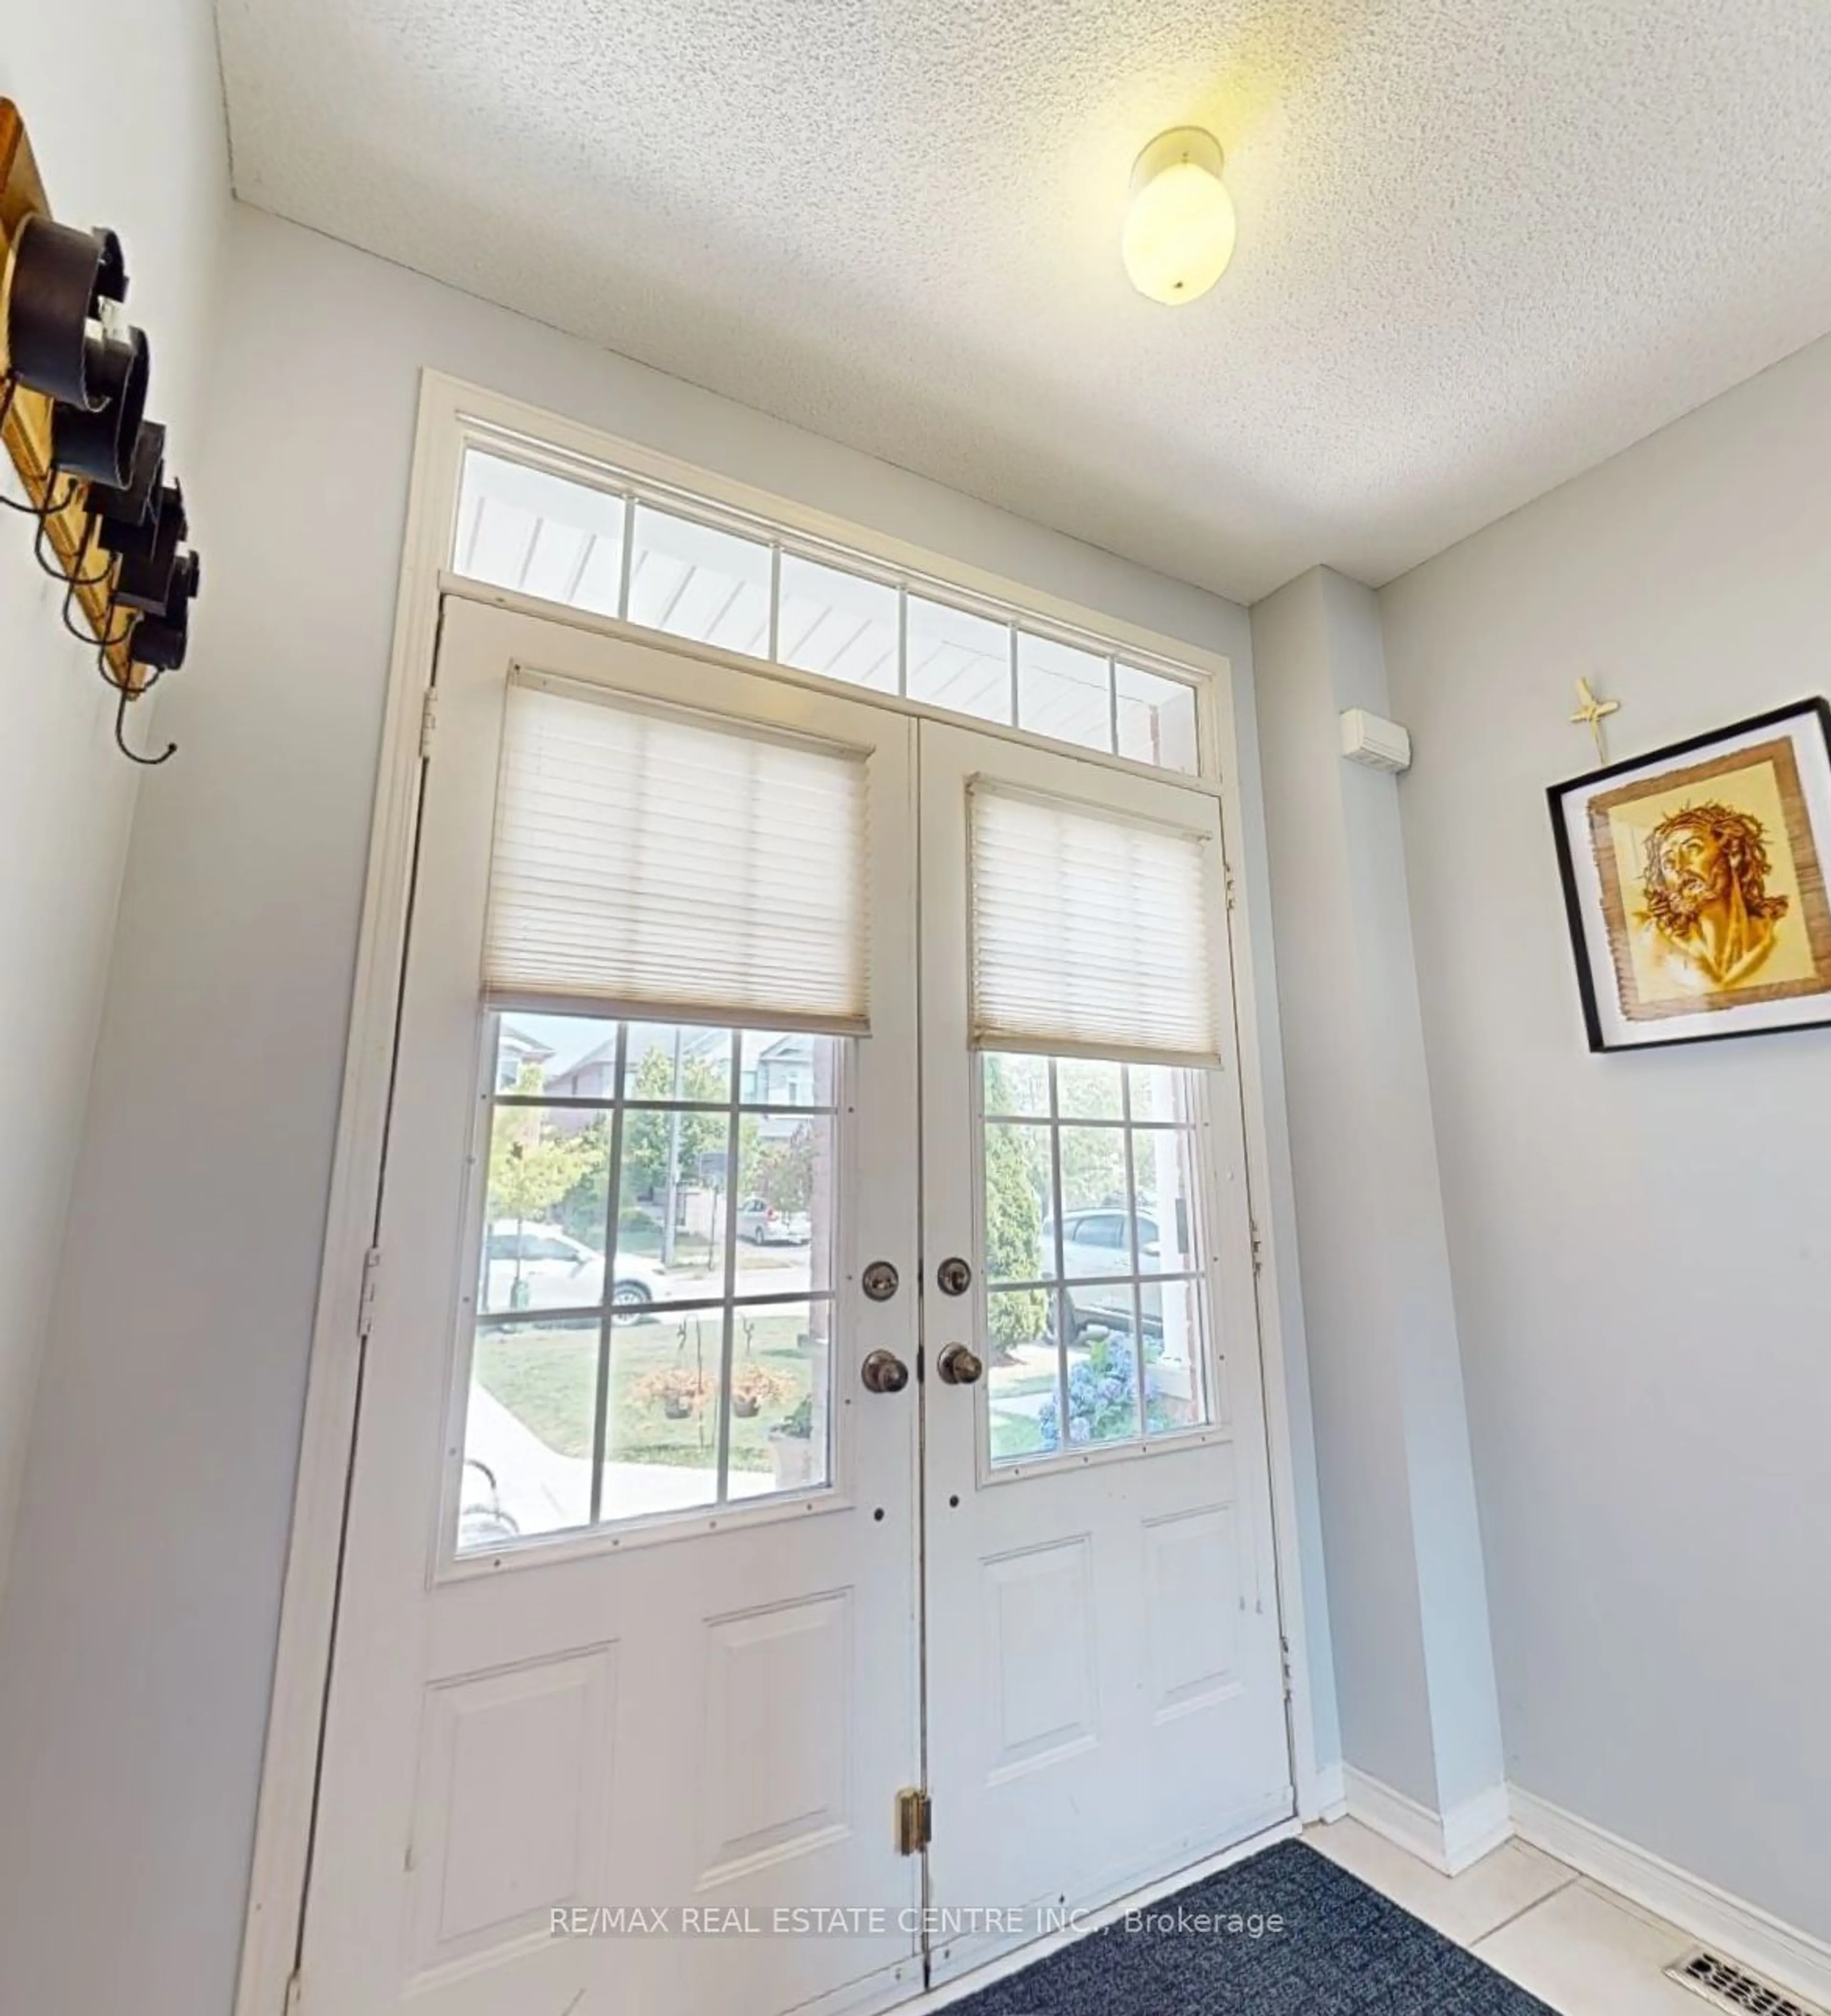 Indoor entryway for 5870 Questman Hllw, Mississauga Ontario L5M 6P3